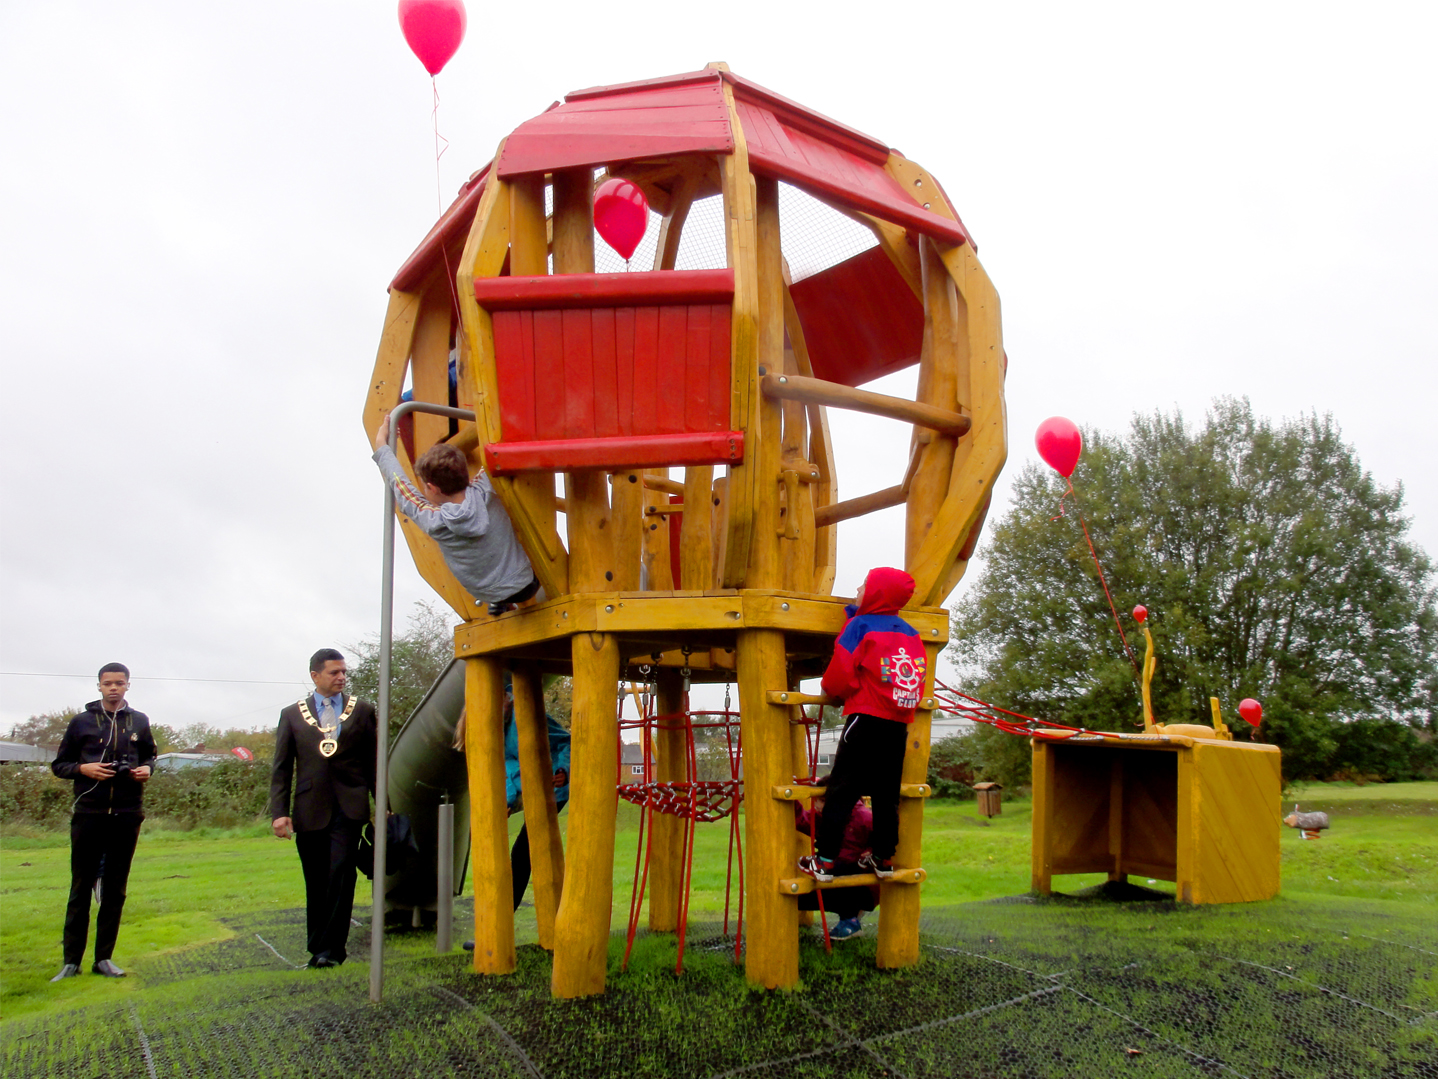 New Haw, Runnymede | The Children's Playground Company